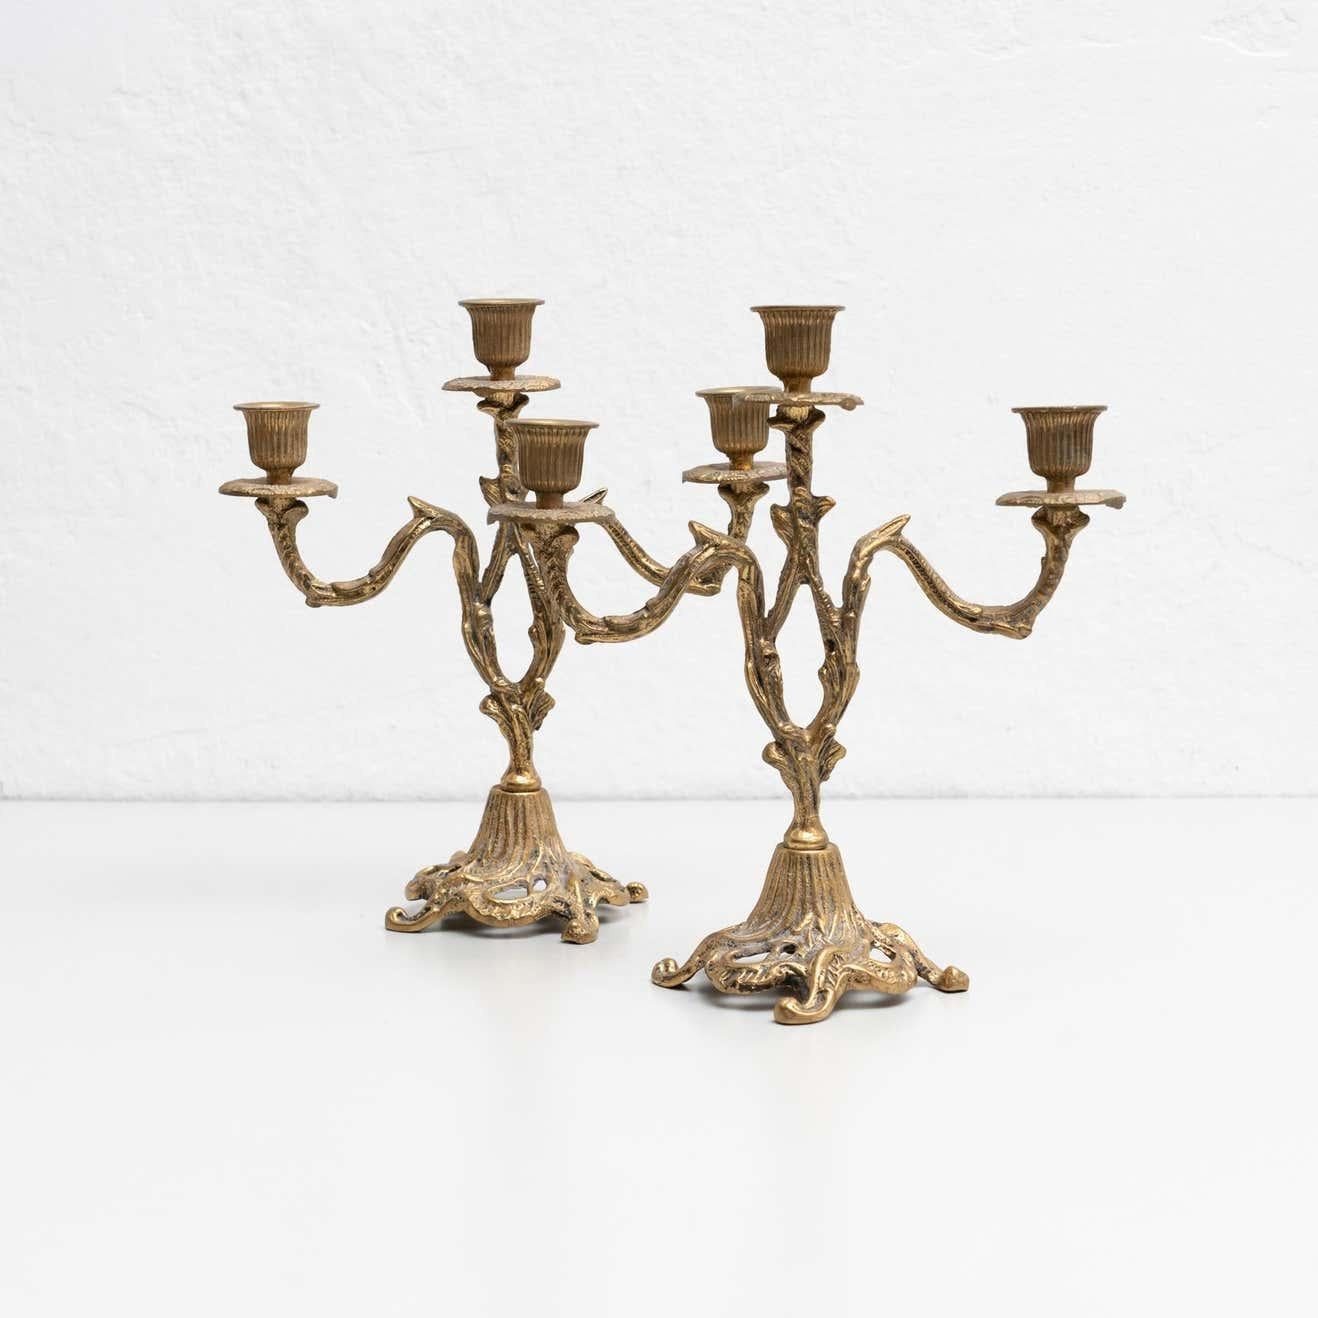 Other Set of Two Rustic Brass Candle Holders, circa 1950 For Sale